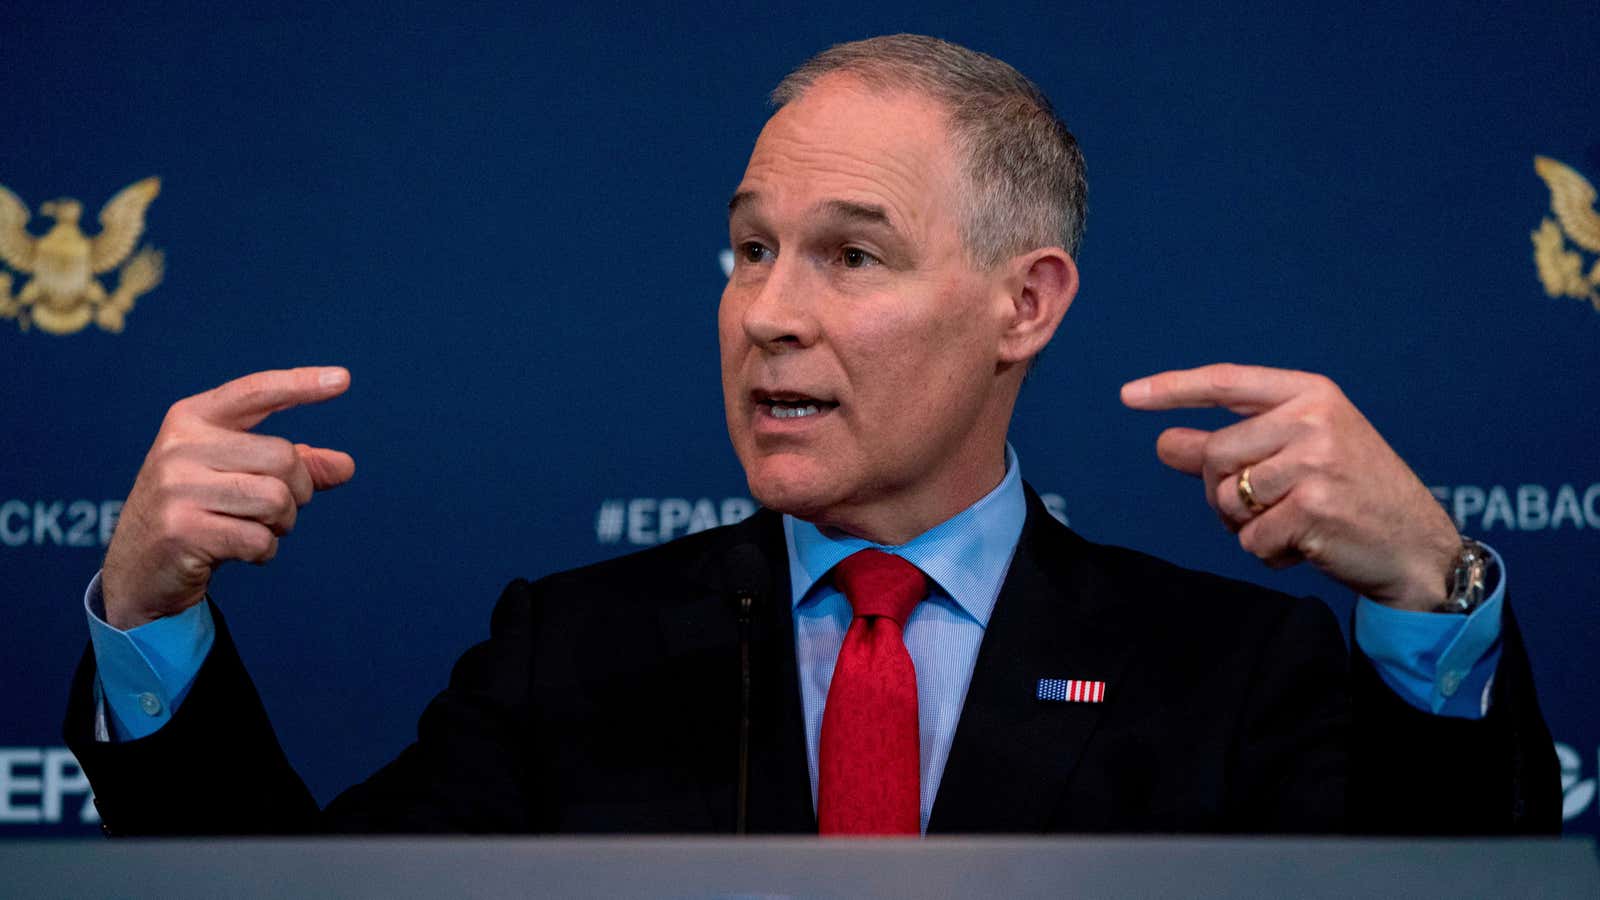 Trump’s EPA administrator Scott Pruitt has been plagued by ethics questions.